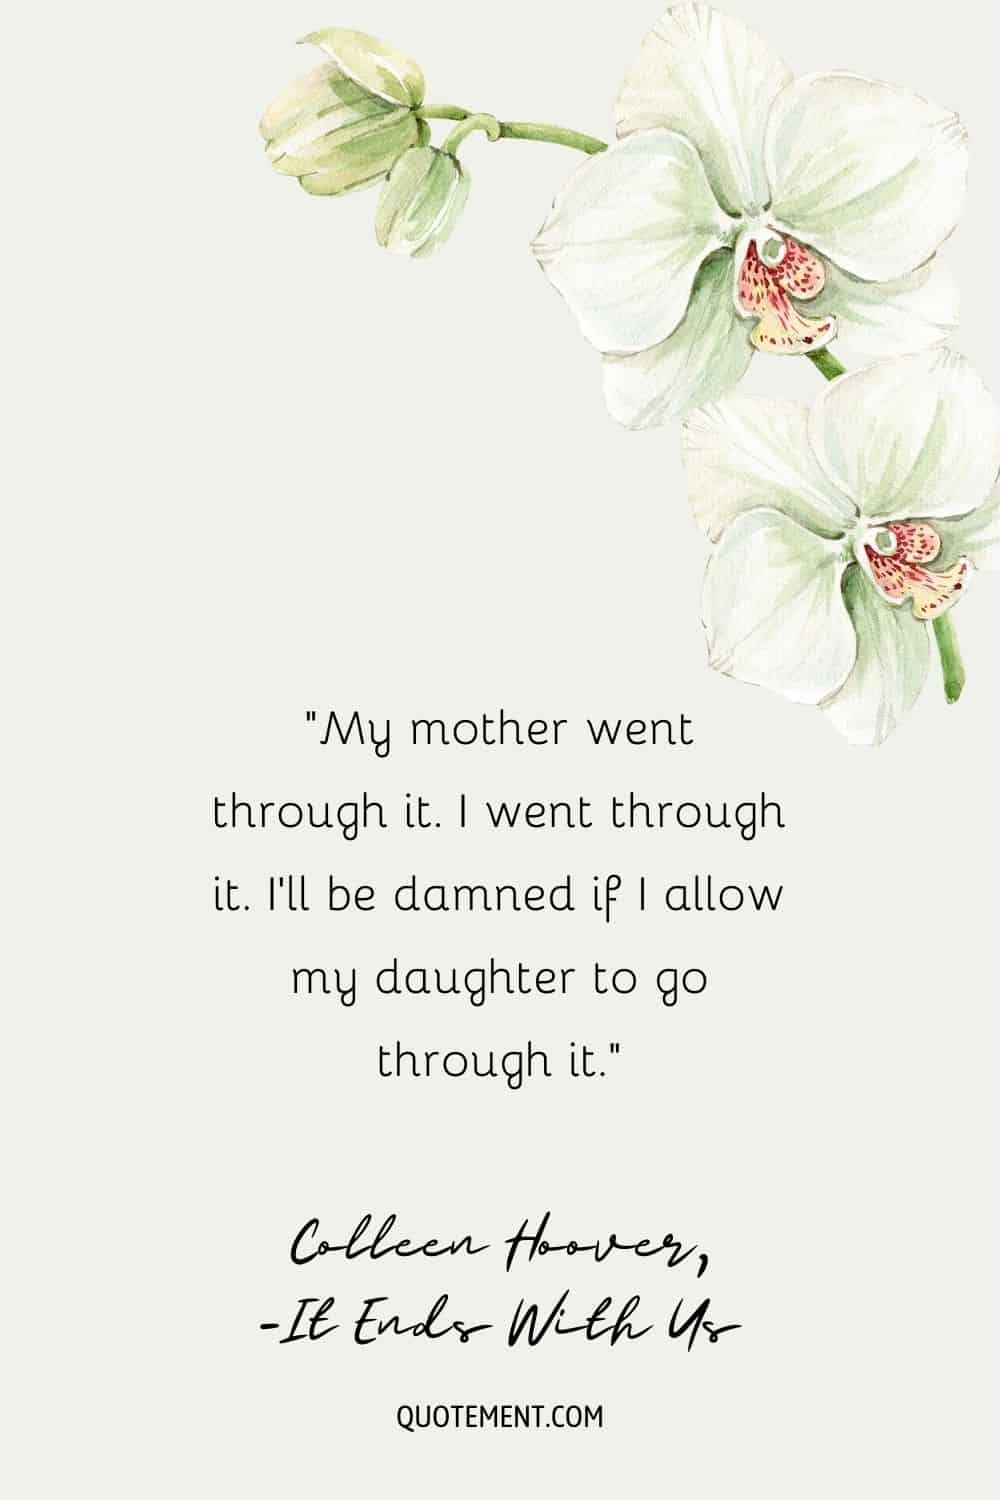 Flowers-illustrated background with a quote from It ends with us
